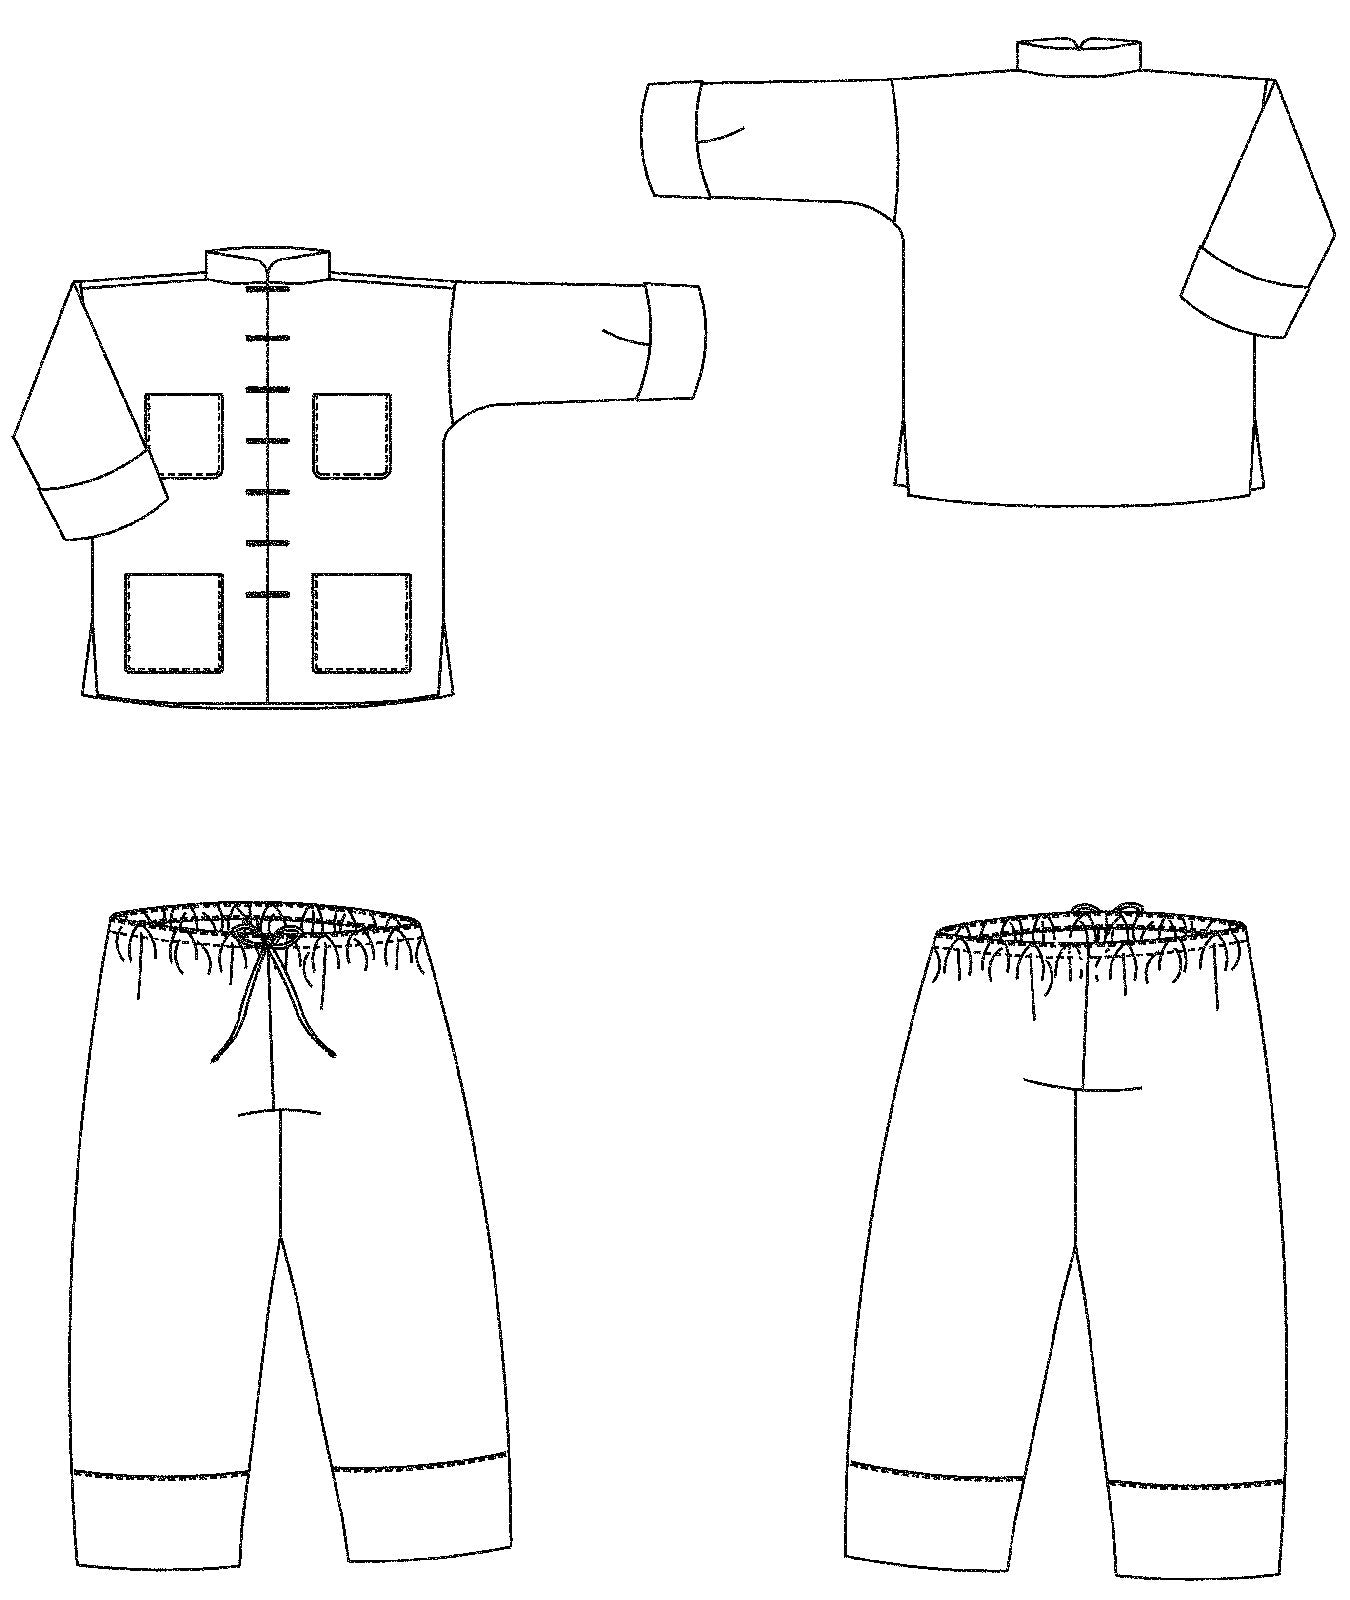 Flat line black and white drawings of front and back view of 145 Chinese Pajamas, jacket and pants.